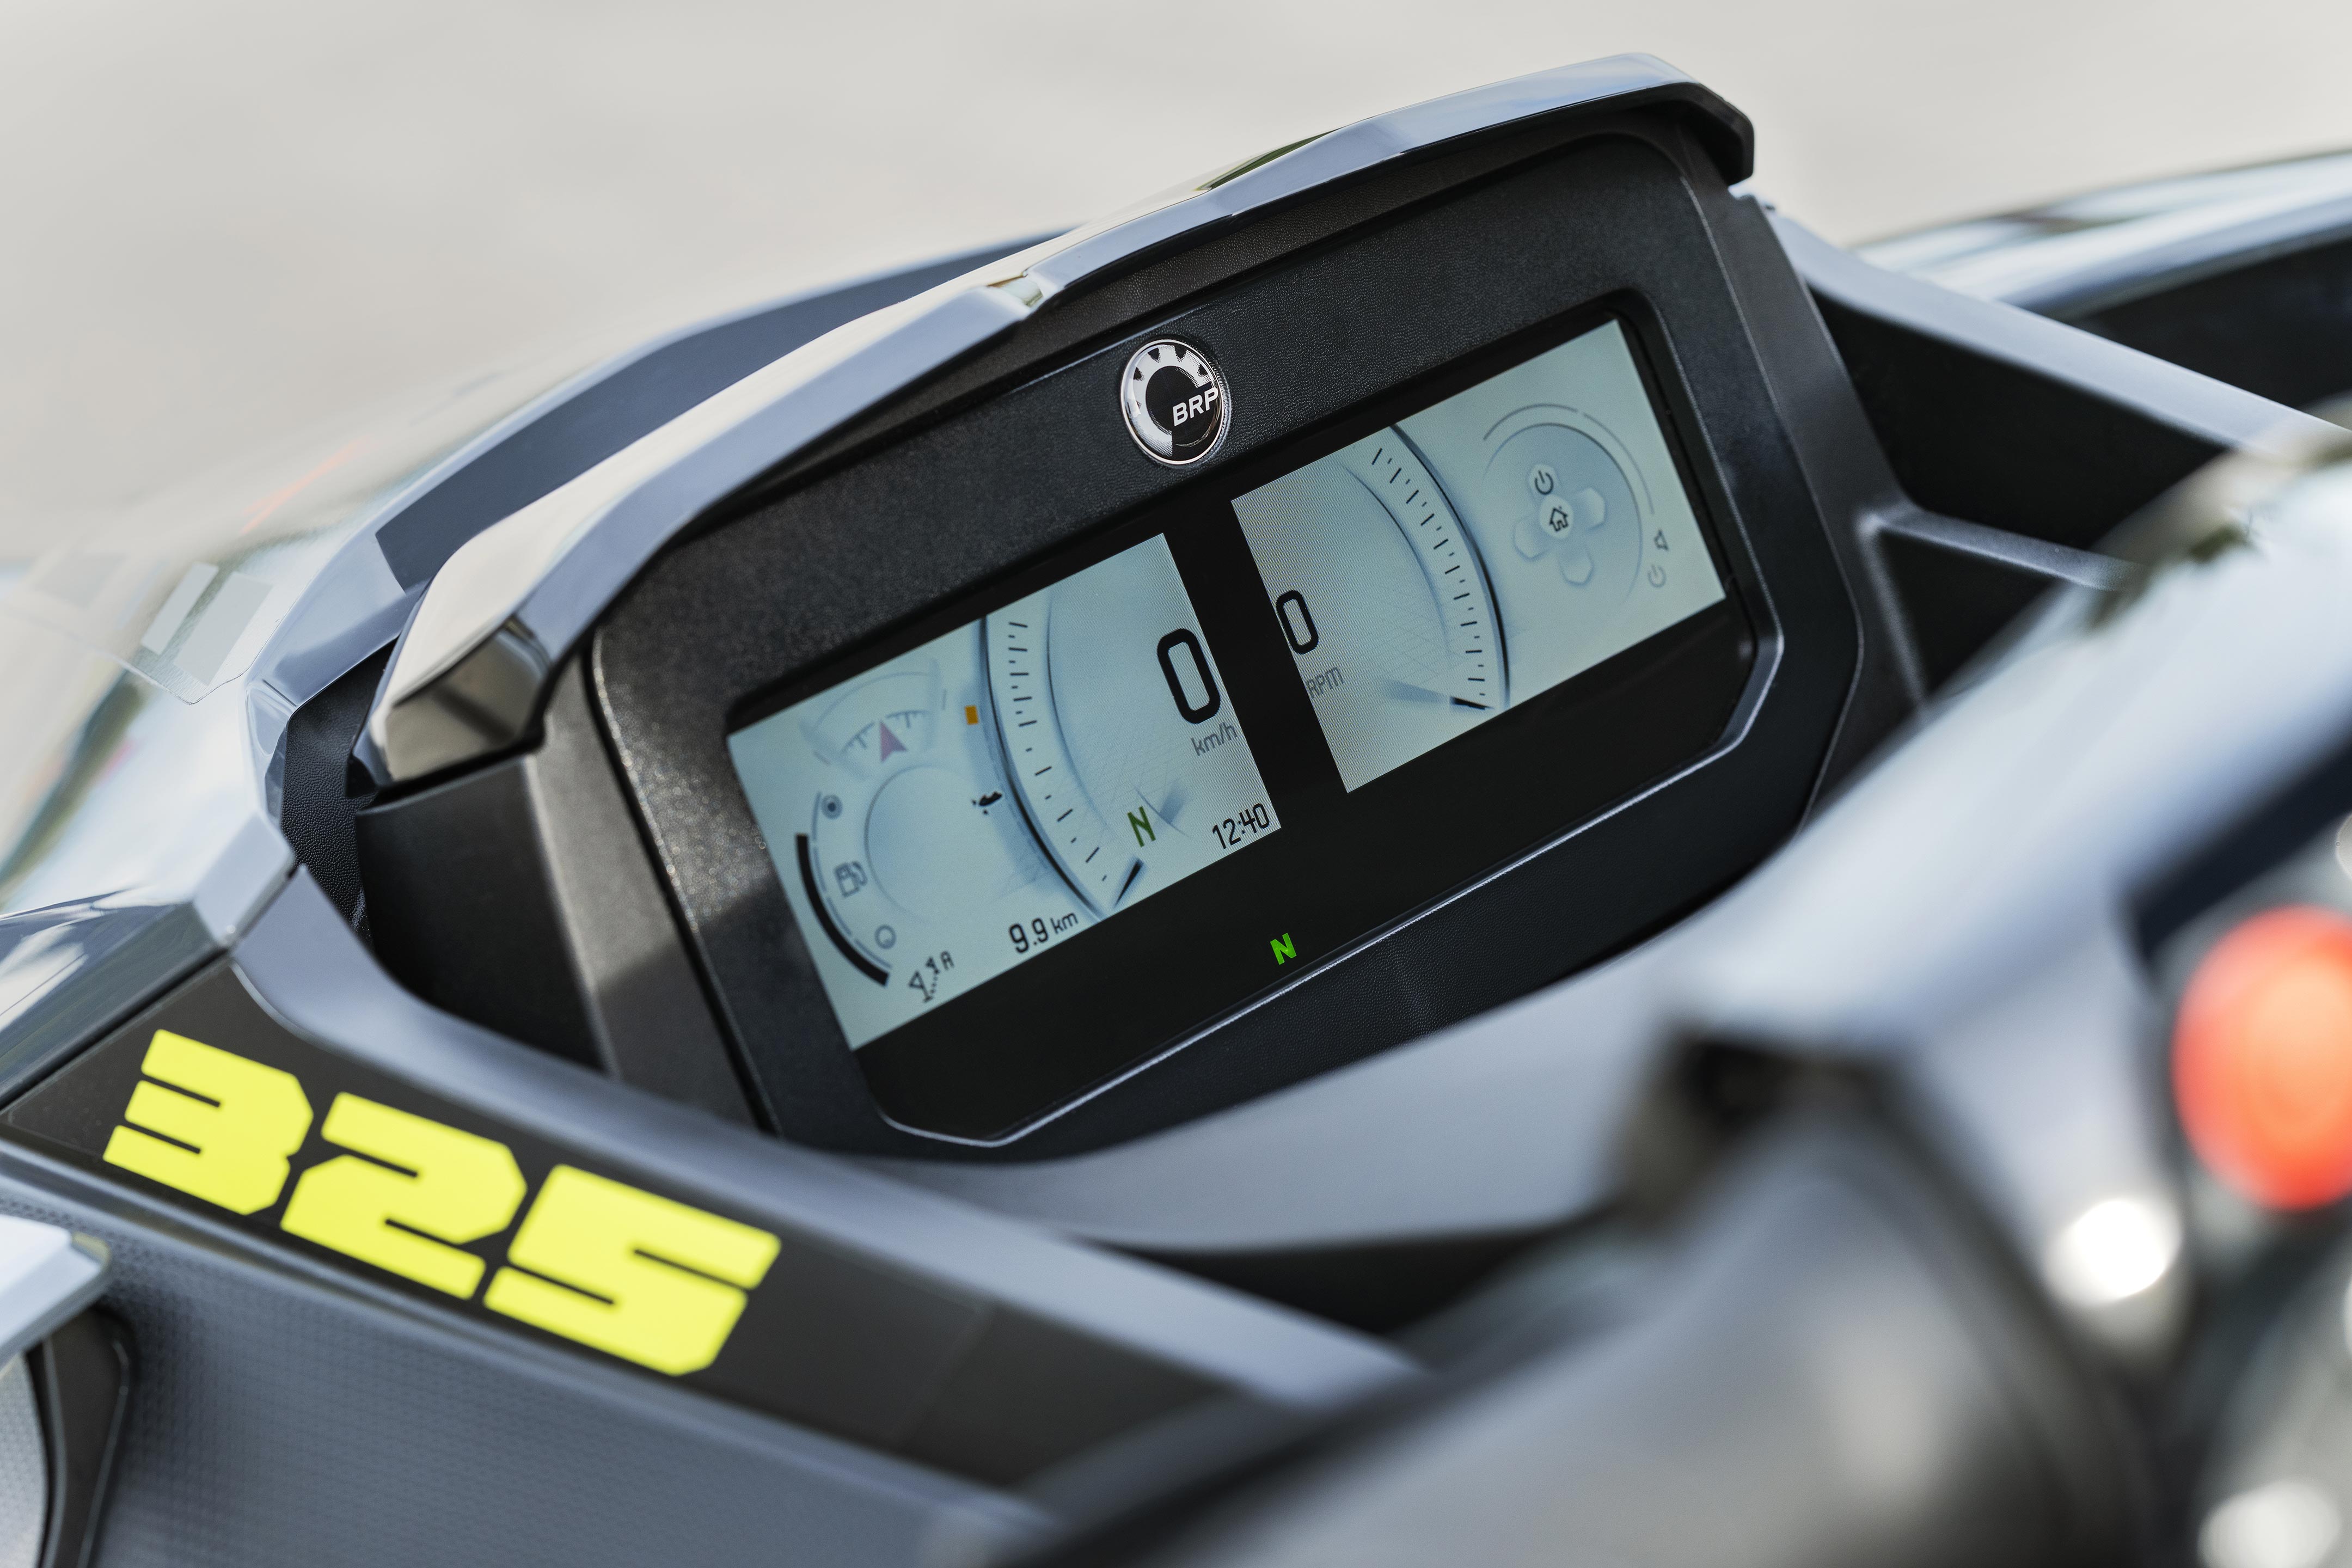 LCD display of the Sea-Doo RXT-X performance personal watercraft